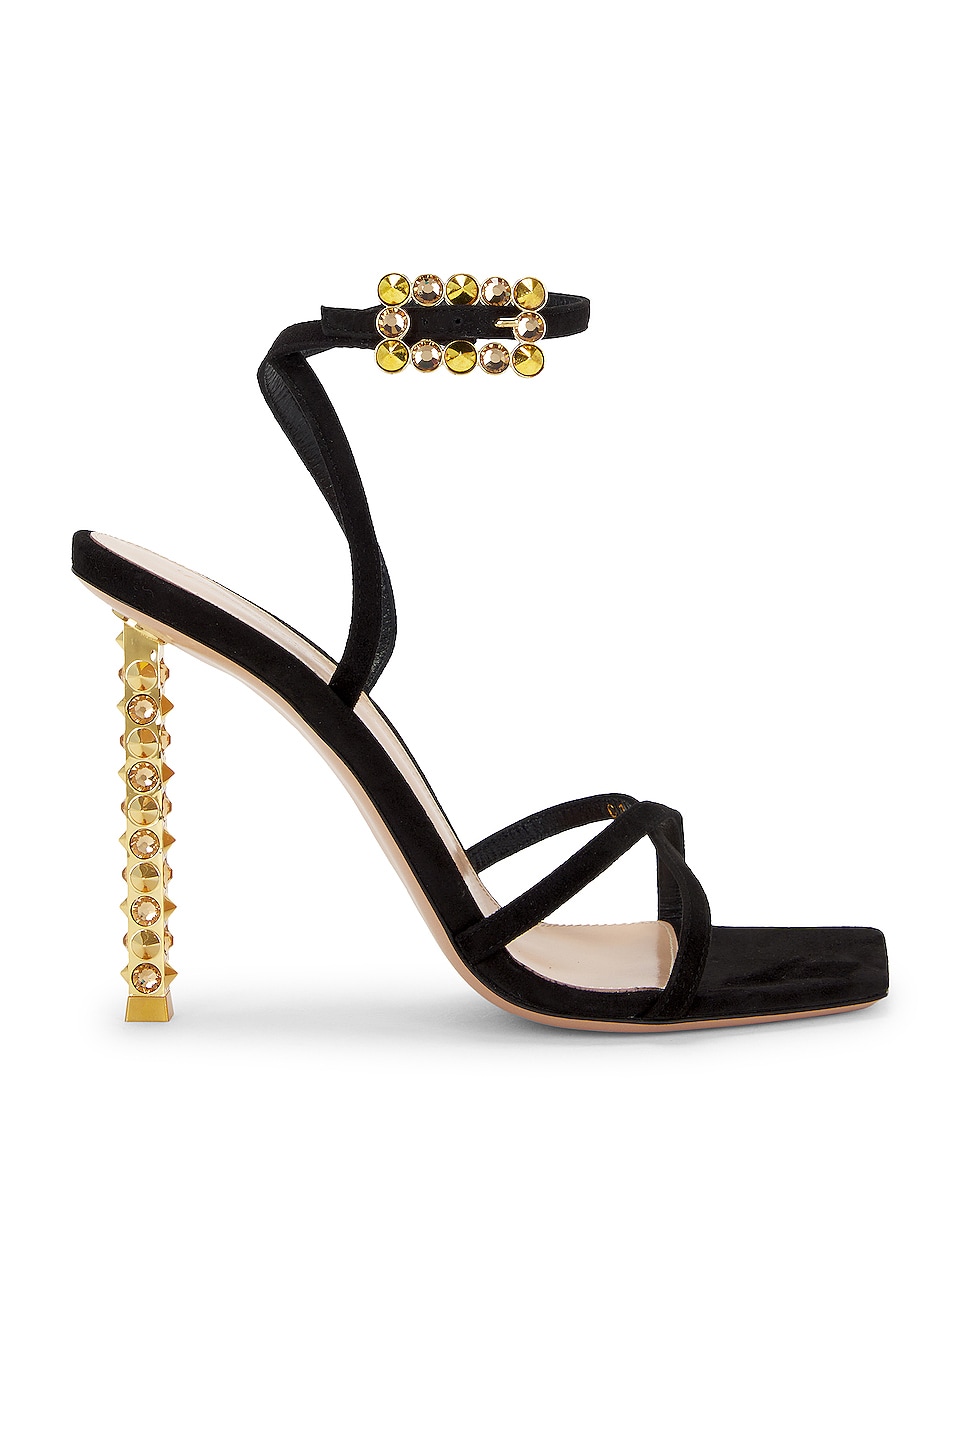 Image 1 of Gianvito Rossi Ankle Strap Sandal in Suede Black